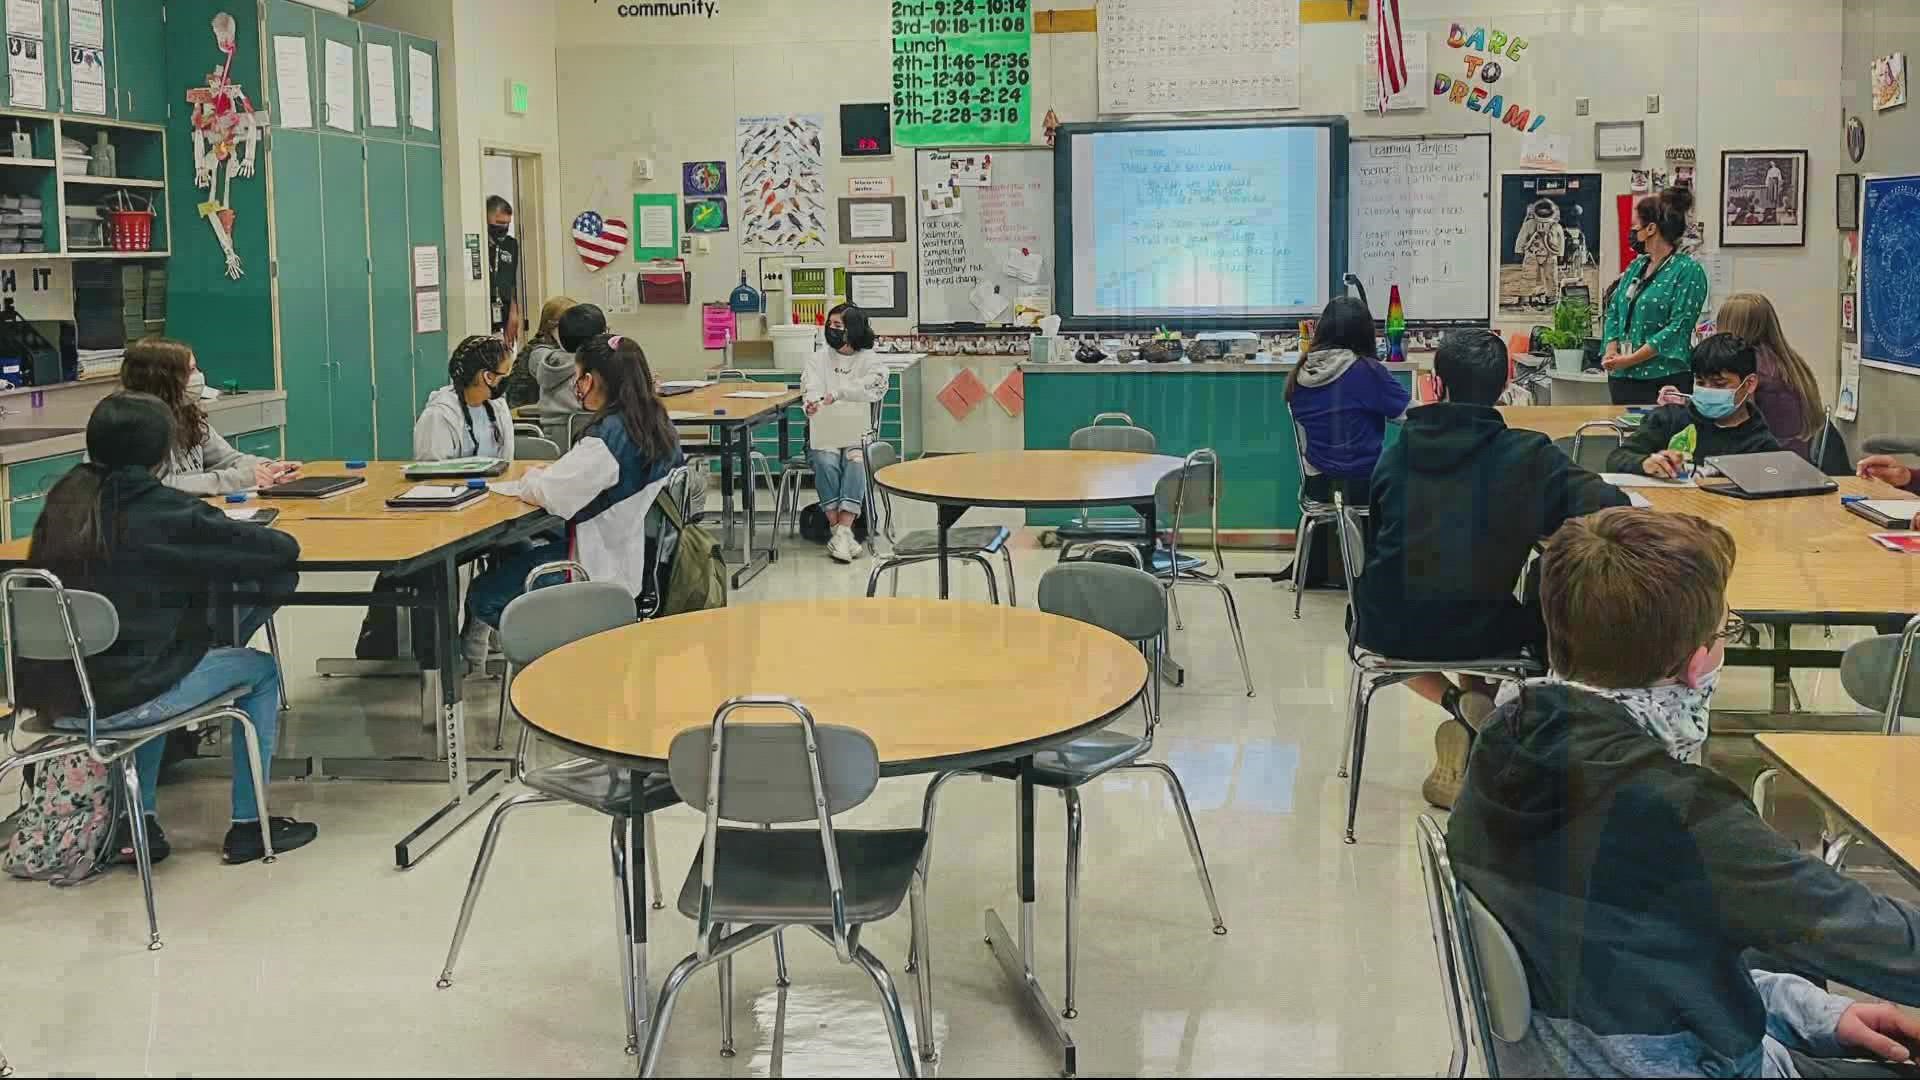 Portland Public Schools and OHSU started a testing system designed to find kids who are not showing symptoms. Education leaders hope it will spread across Oregon.